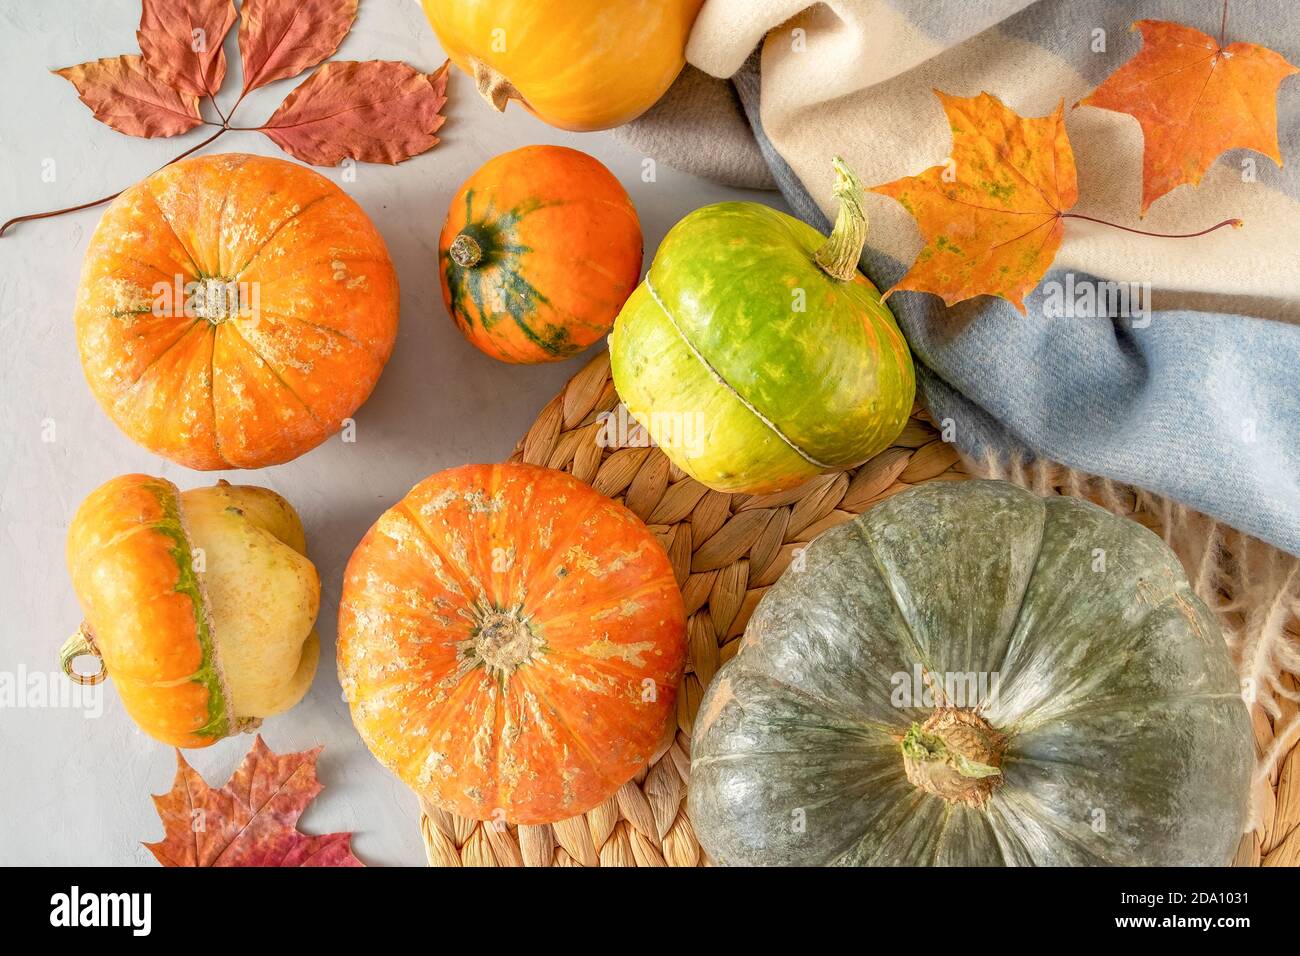 Flat lay of beautiful little pumpkins on a gray background with a warm blanket and a wicker rattan napkin. Horizontal orientation, selective focus. Stock Photo